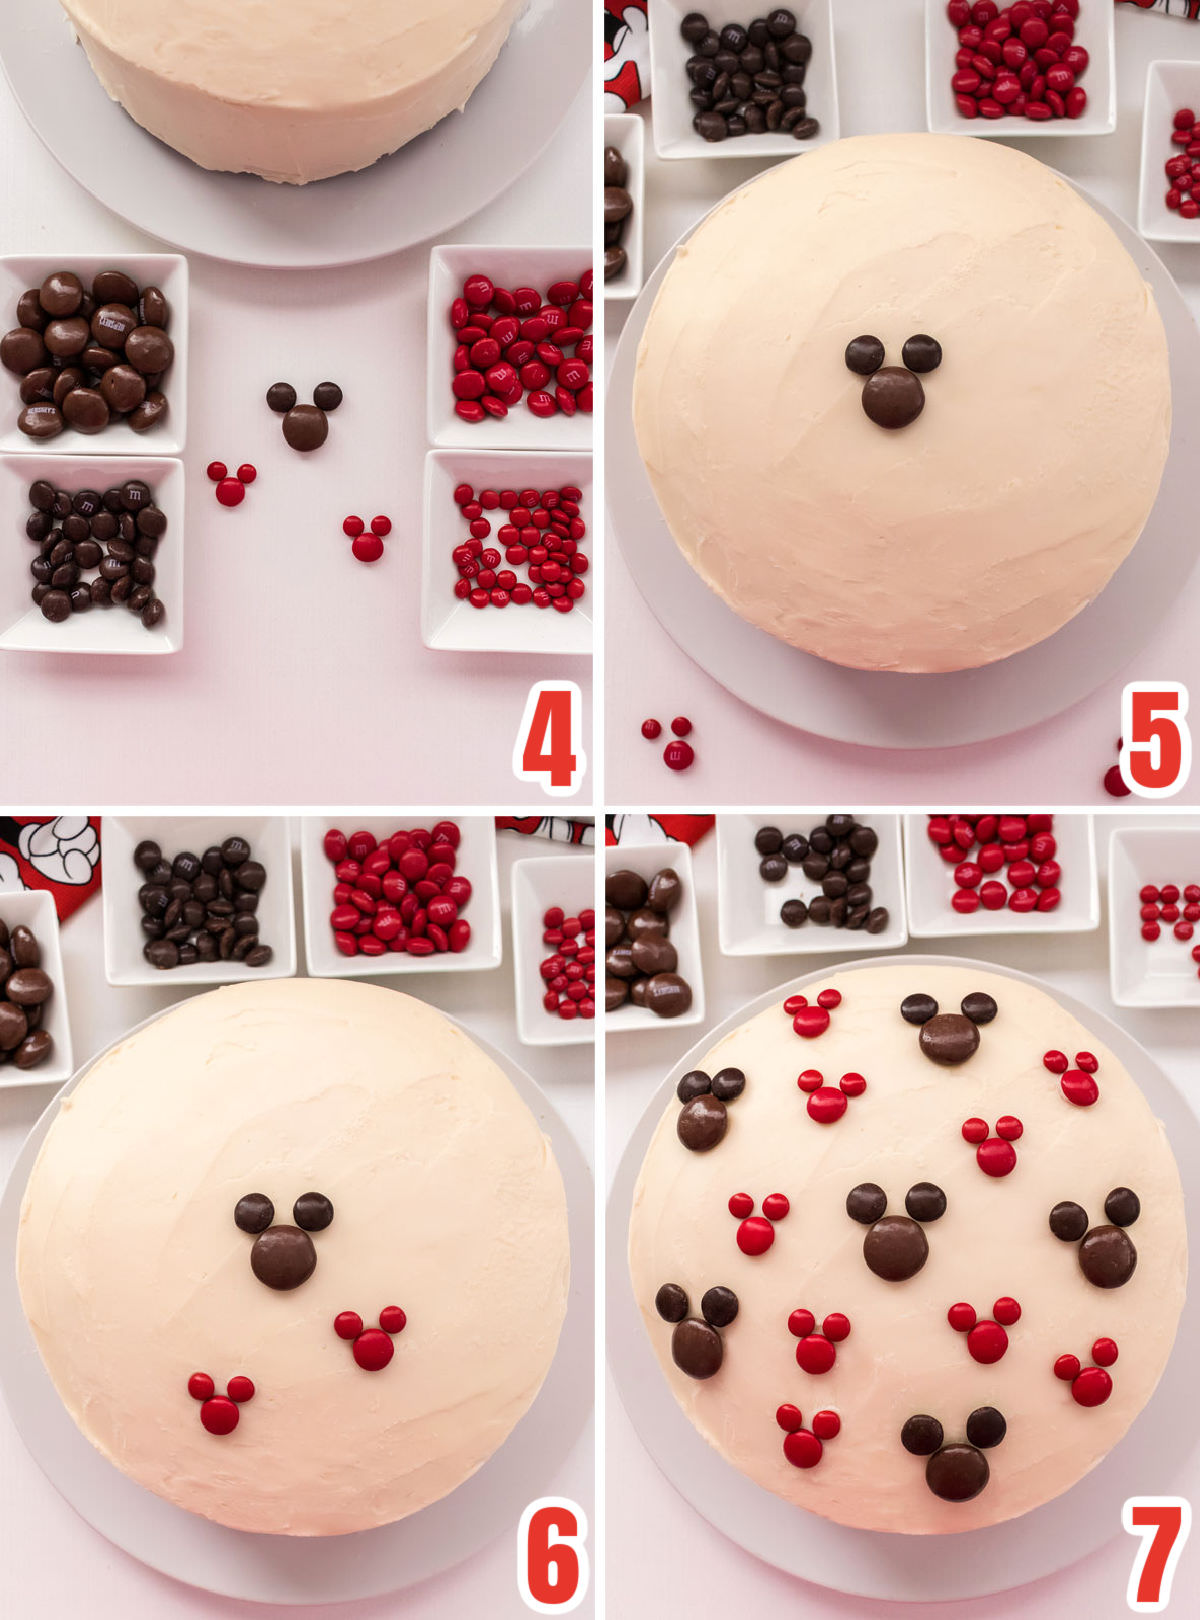 Collage image showing the steps for decorating the Easy Mickey Mouse Cake with M&M's.